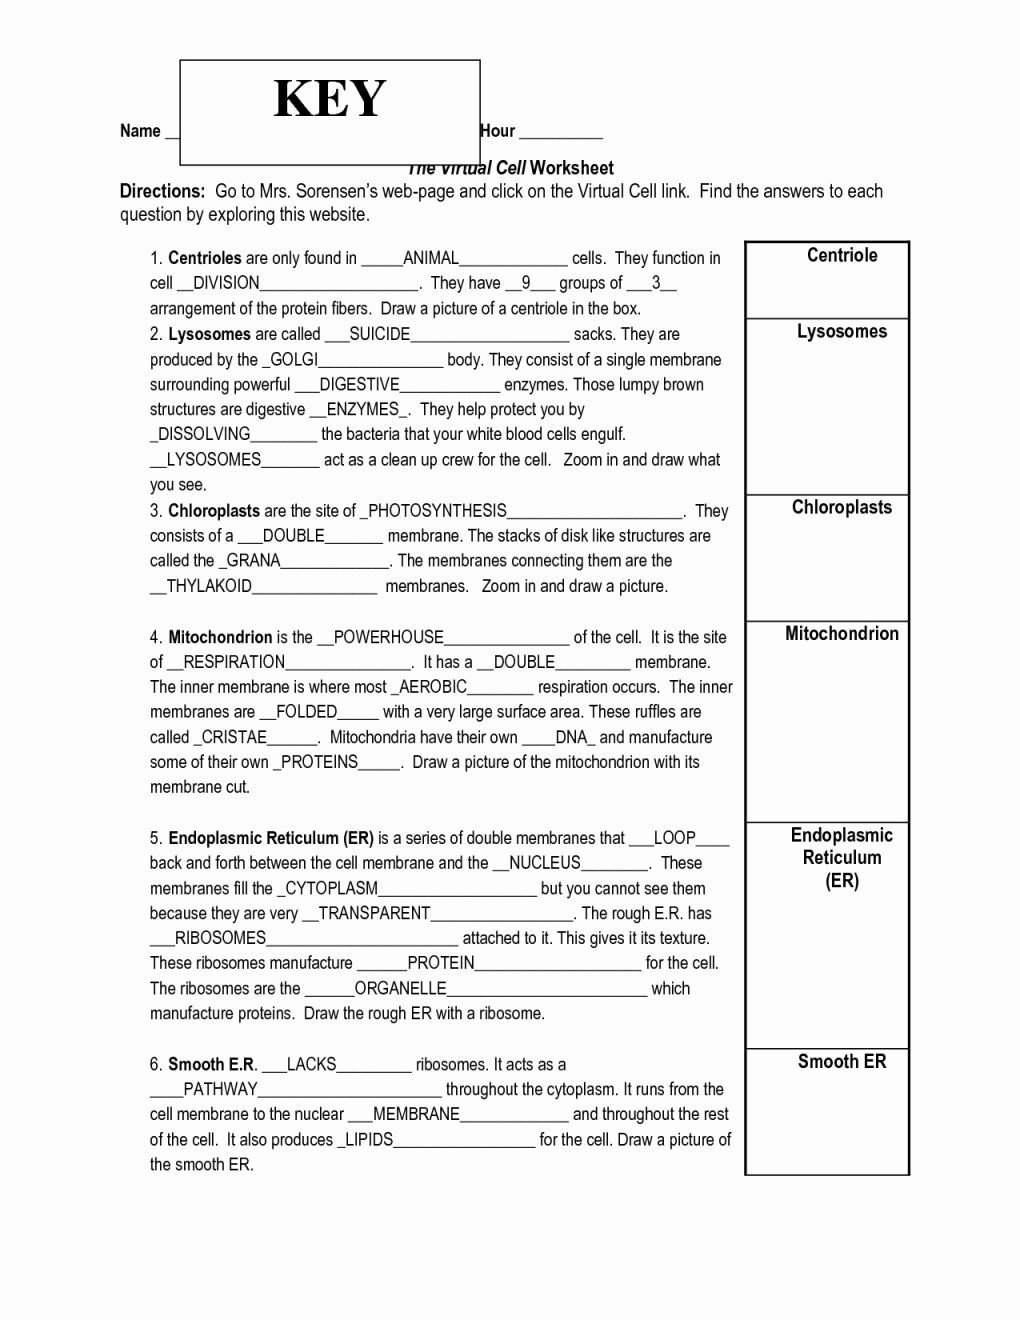 Transport Across Membranes Worksheet Answers  Briefencounters For Transport Across Membranes Worksheet Answers